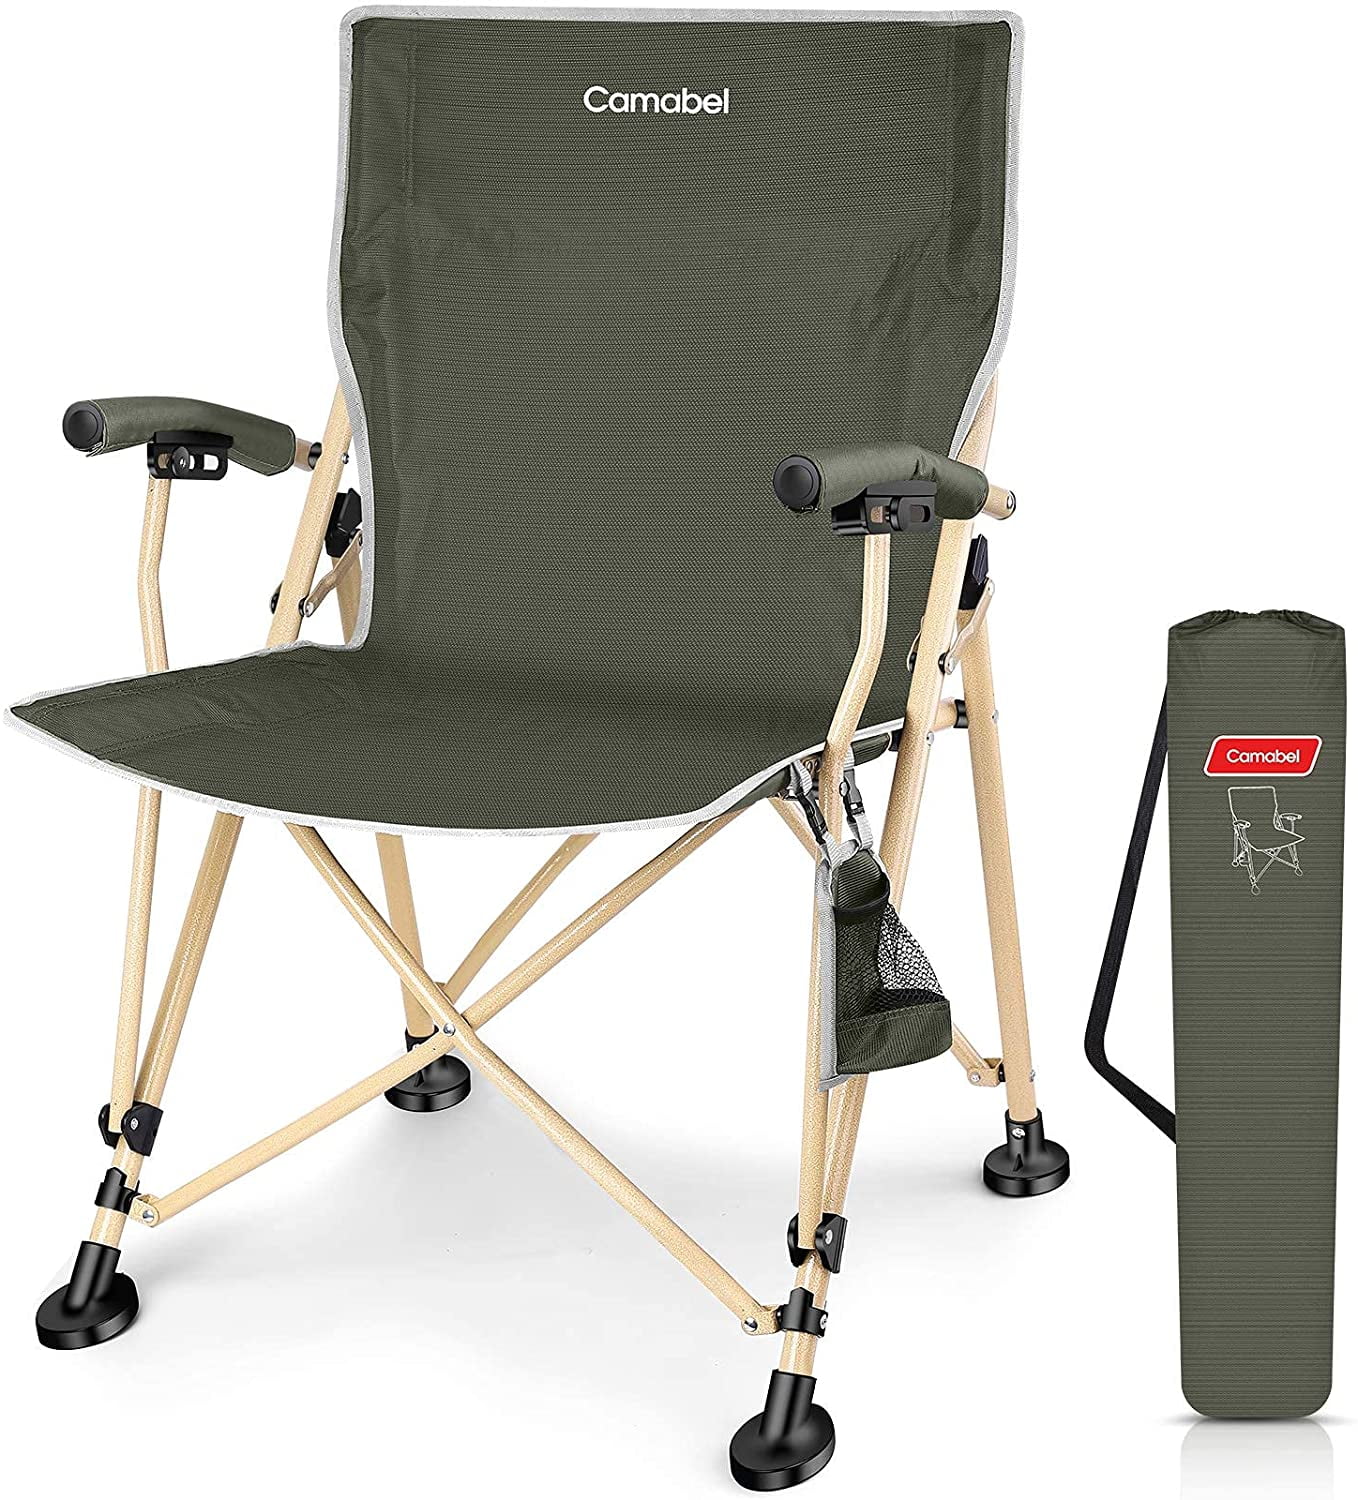 FOLDING CAMPING CHAIR GREEN METAL COLLAPSIBLE FISHING OUTDOOR WITH CUP HOLDER 